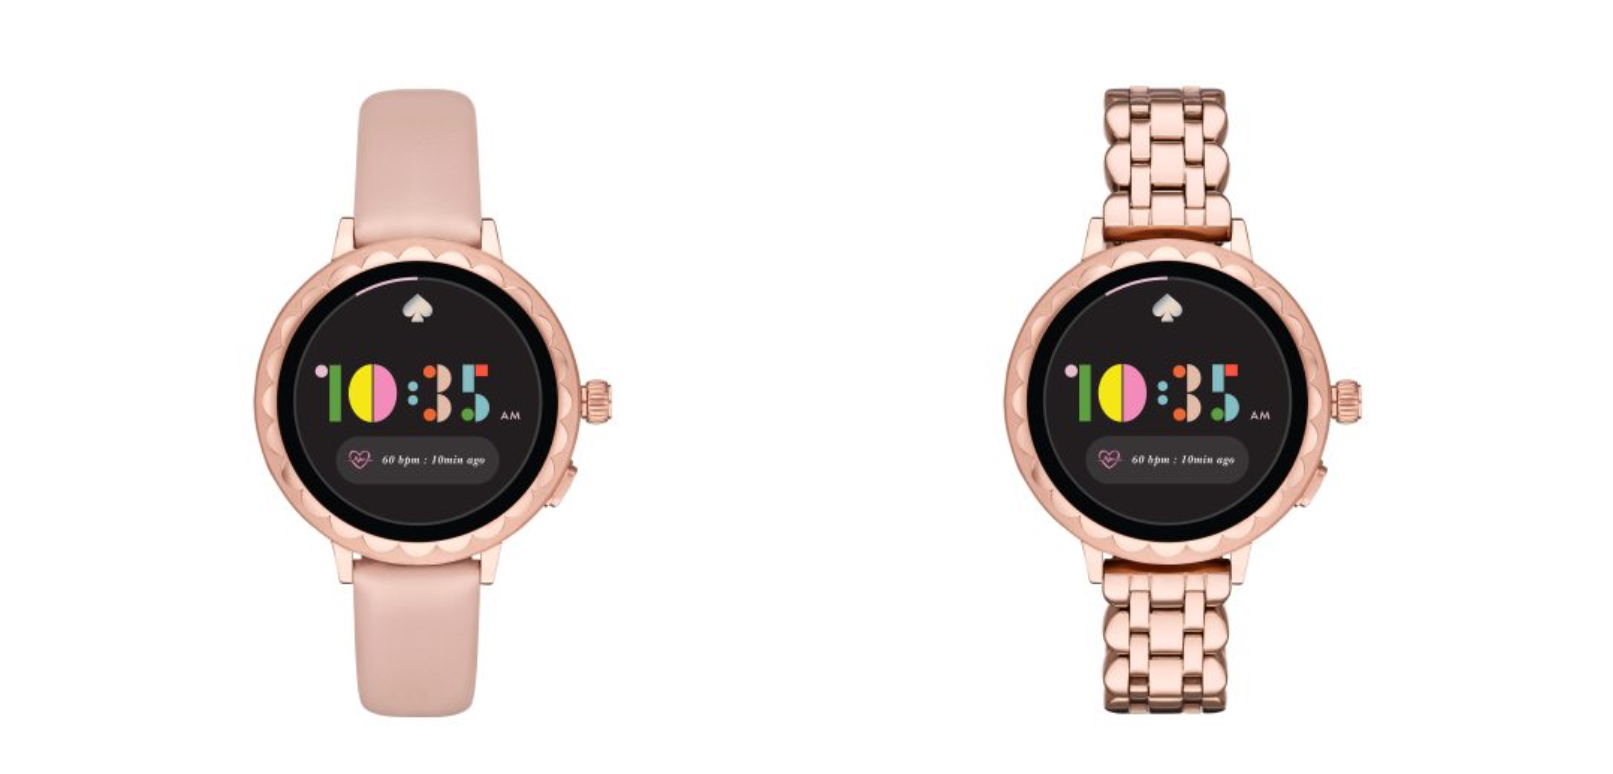 Kate Spade Scallop 2 Wear OS now has heart rate sensor, built-in GPS ...